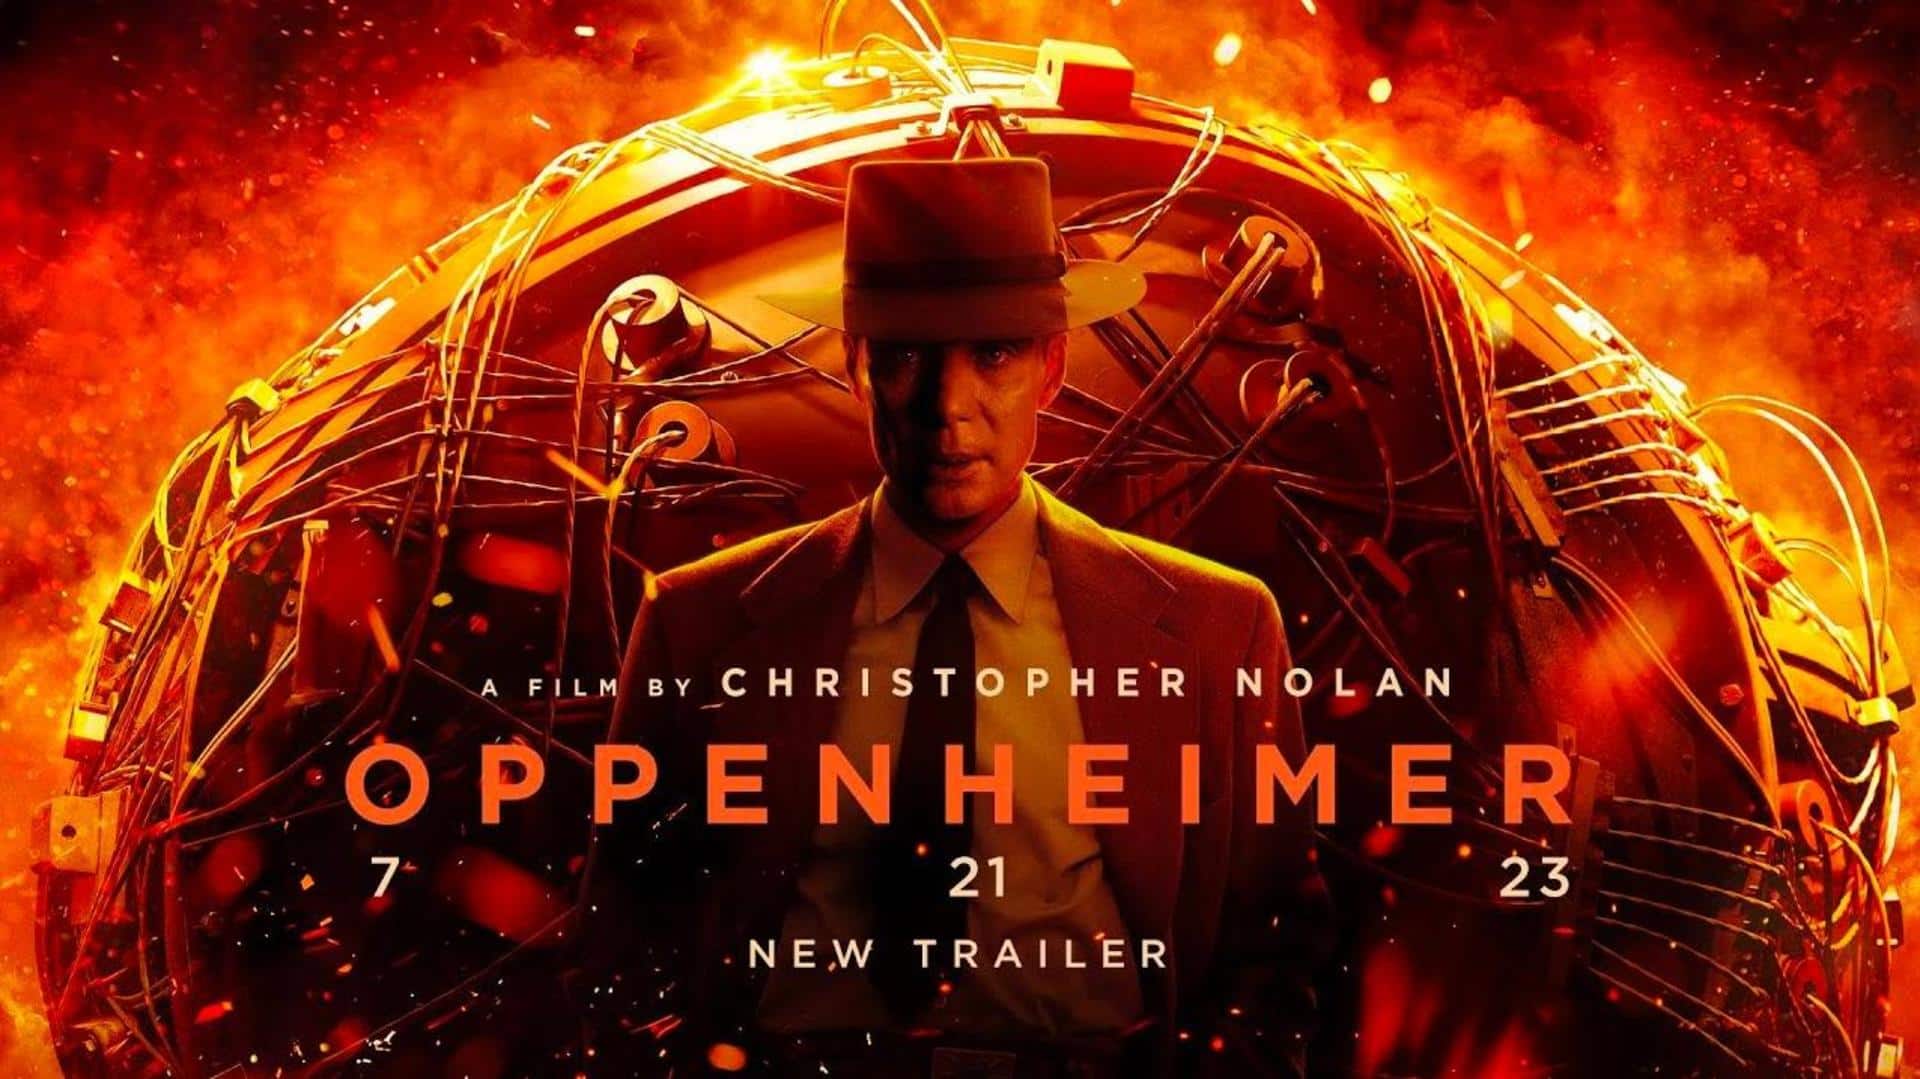 'Oppenheimer' trailer: Explosive historical drama packed with visual spectacle